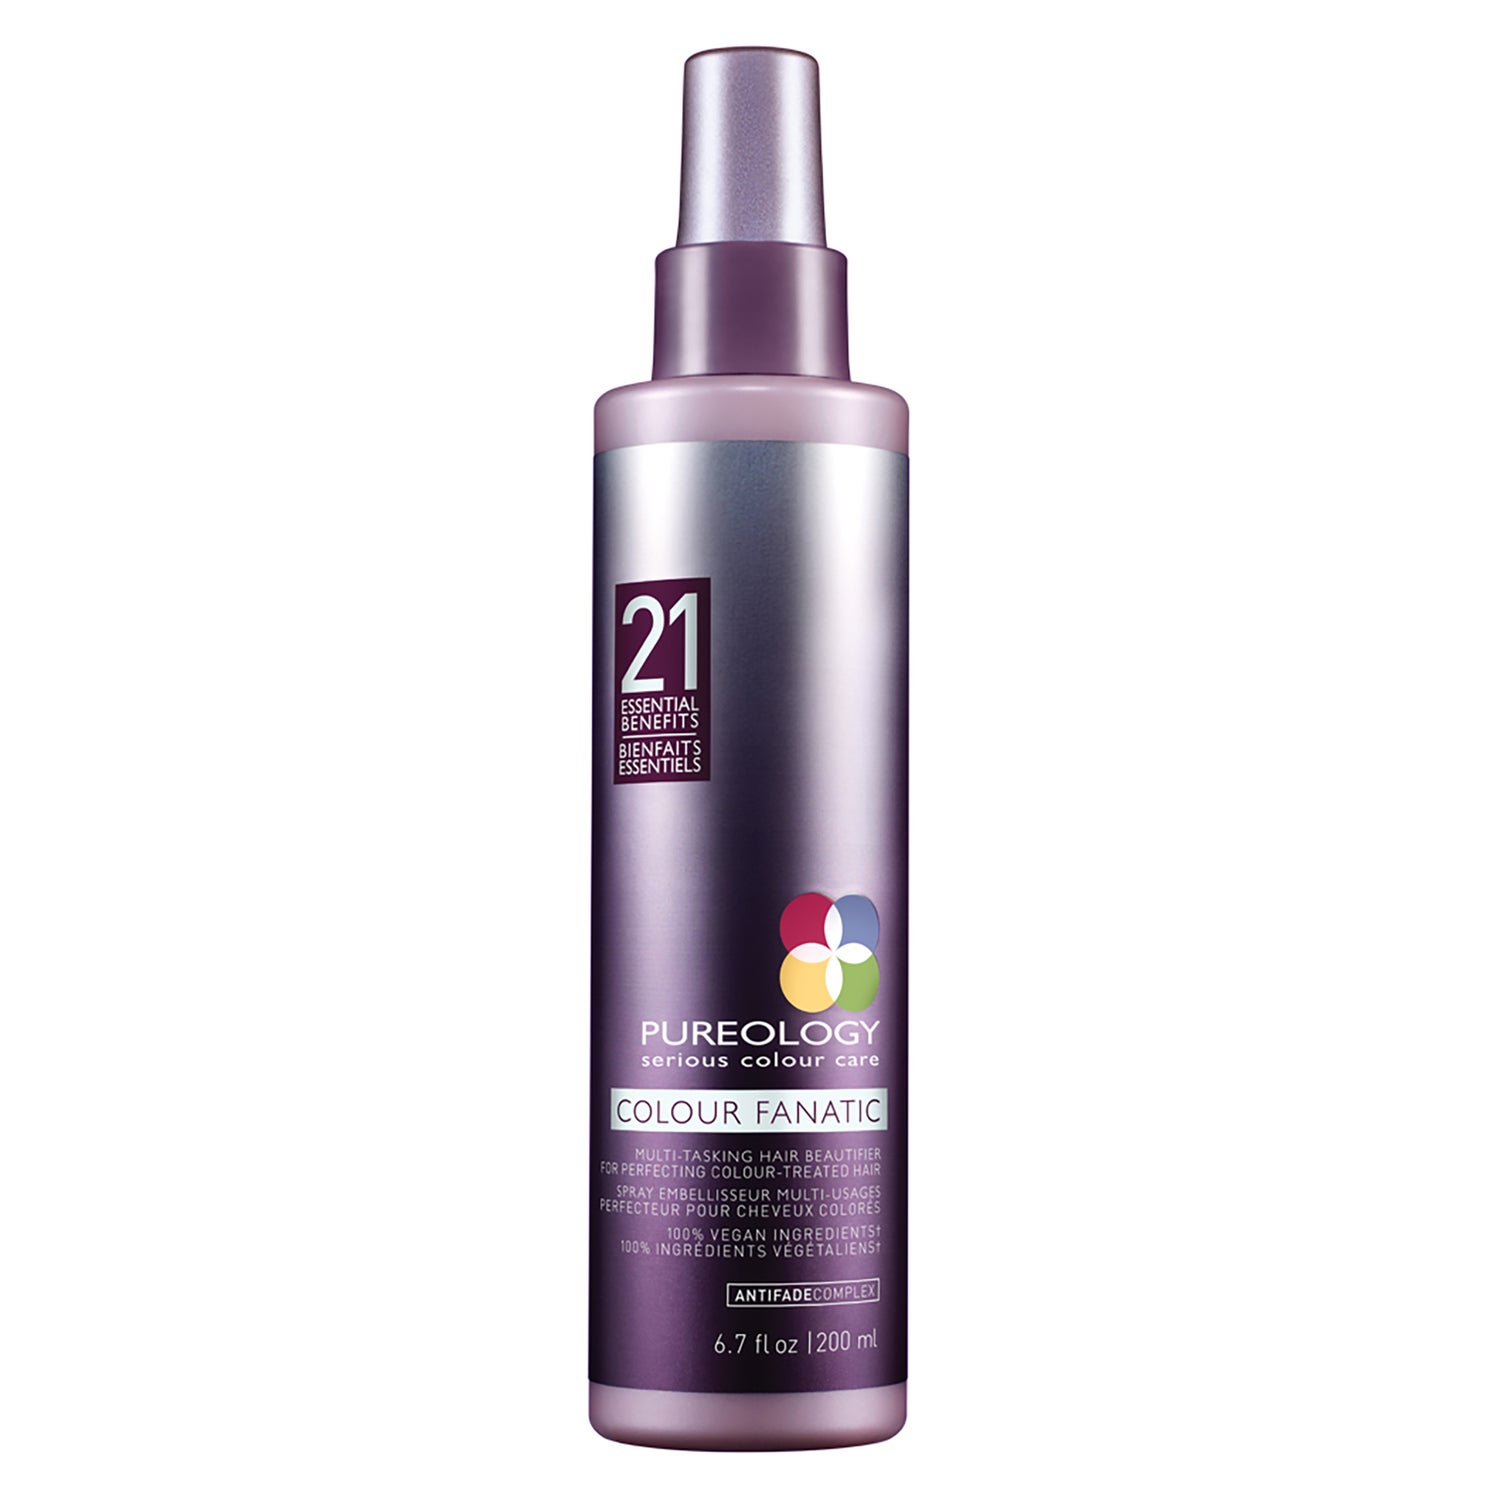 Pureology Colour Fanatic Multi-Benefit Leave-In Treatment Spray 6.7oz (Worth $54)